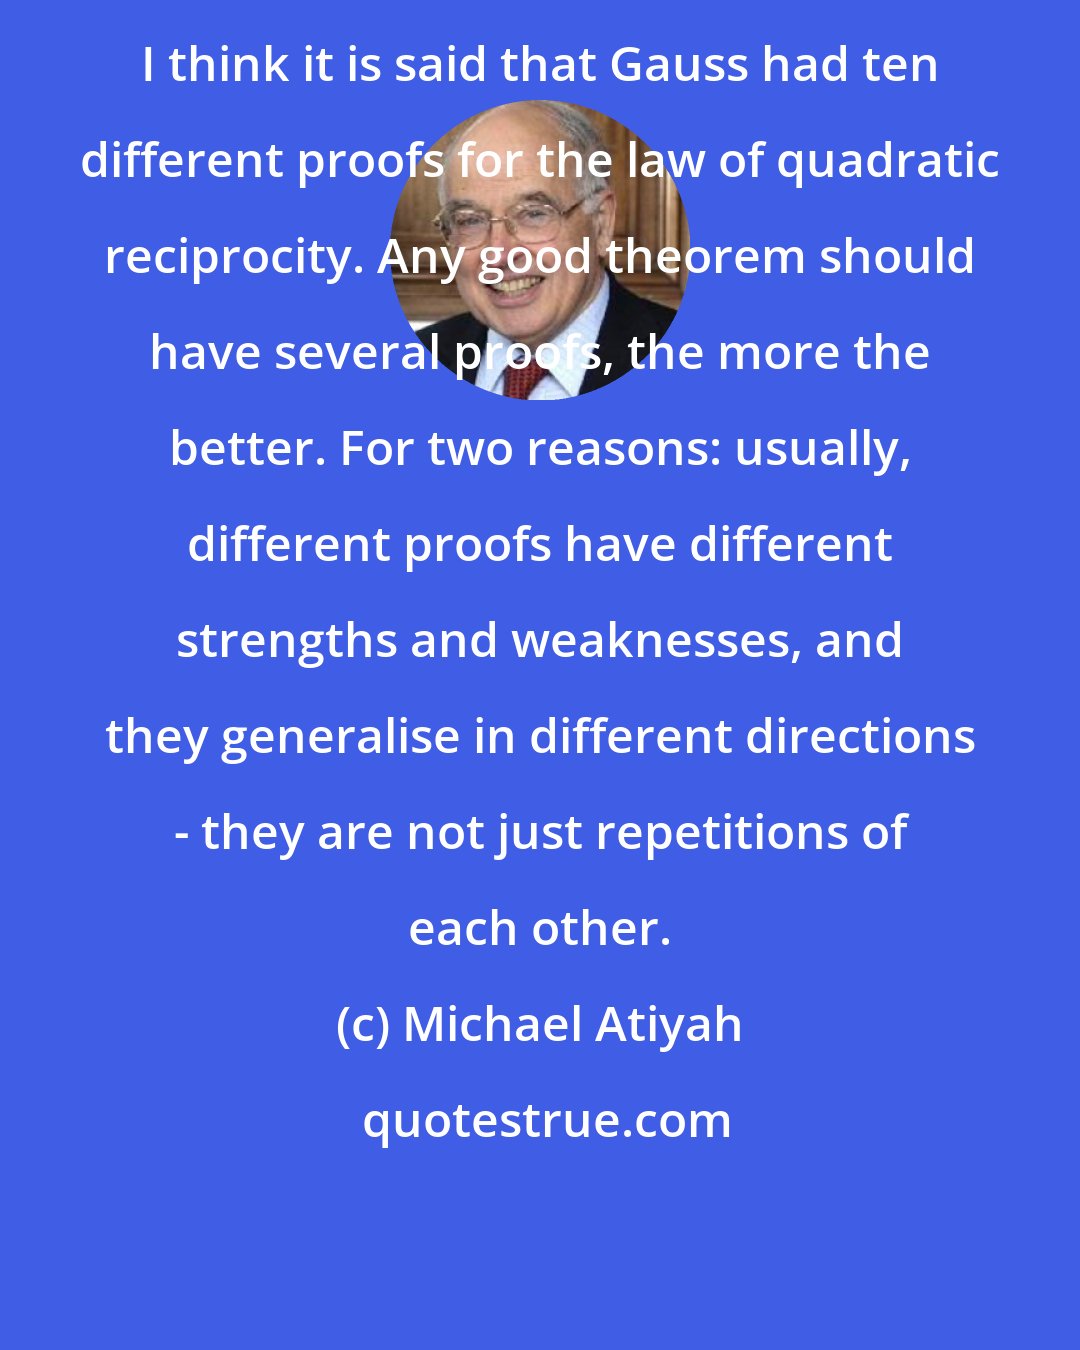 Michael Atiyah: I think it is said that Gauss had ten different proofs for the law of quadratic reciprocity. Any good theorem should have several proofs, the more the better. For two reasons: usually, different proofs have different strengths and weaknesses, and they generalise in different directions - they are not just repetitions of each other.